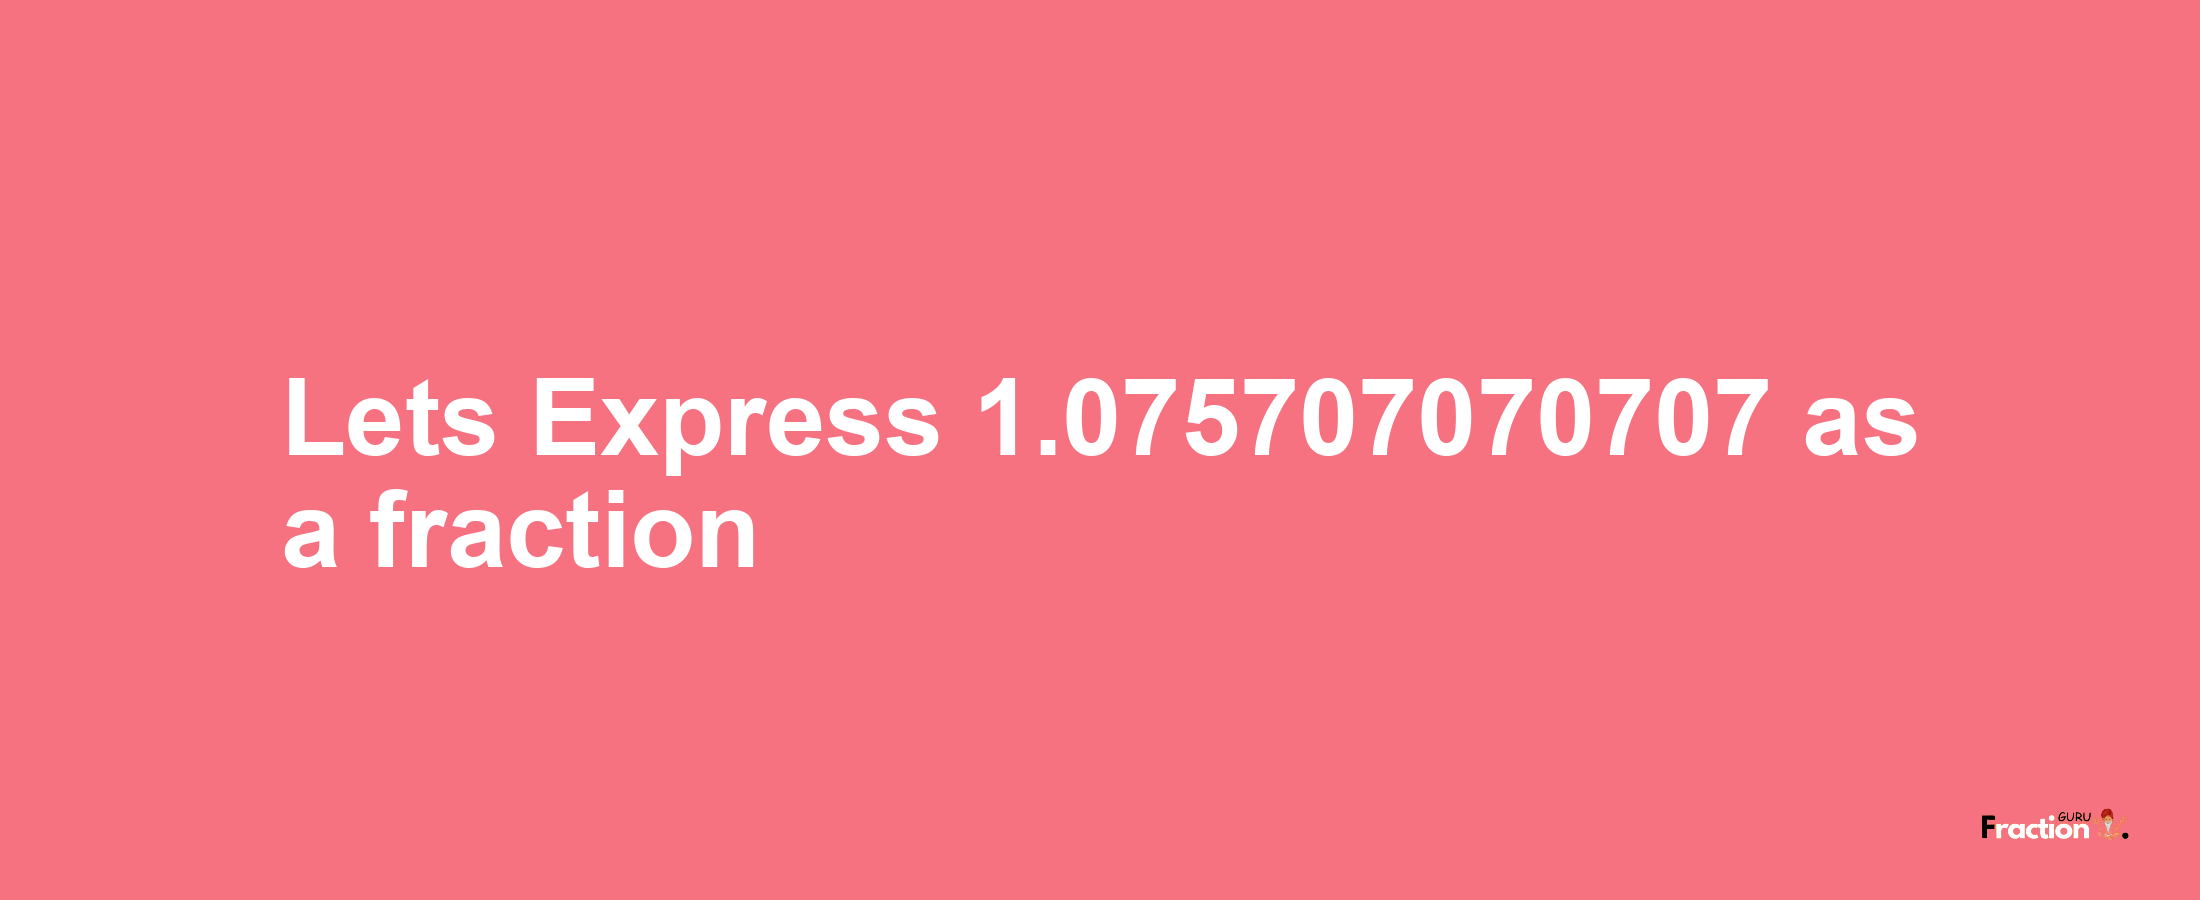 Lets Express 1.075707070707 as afraction